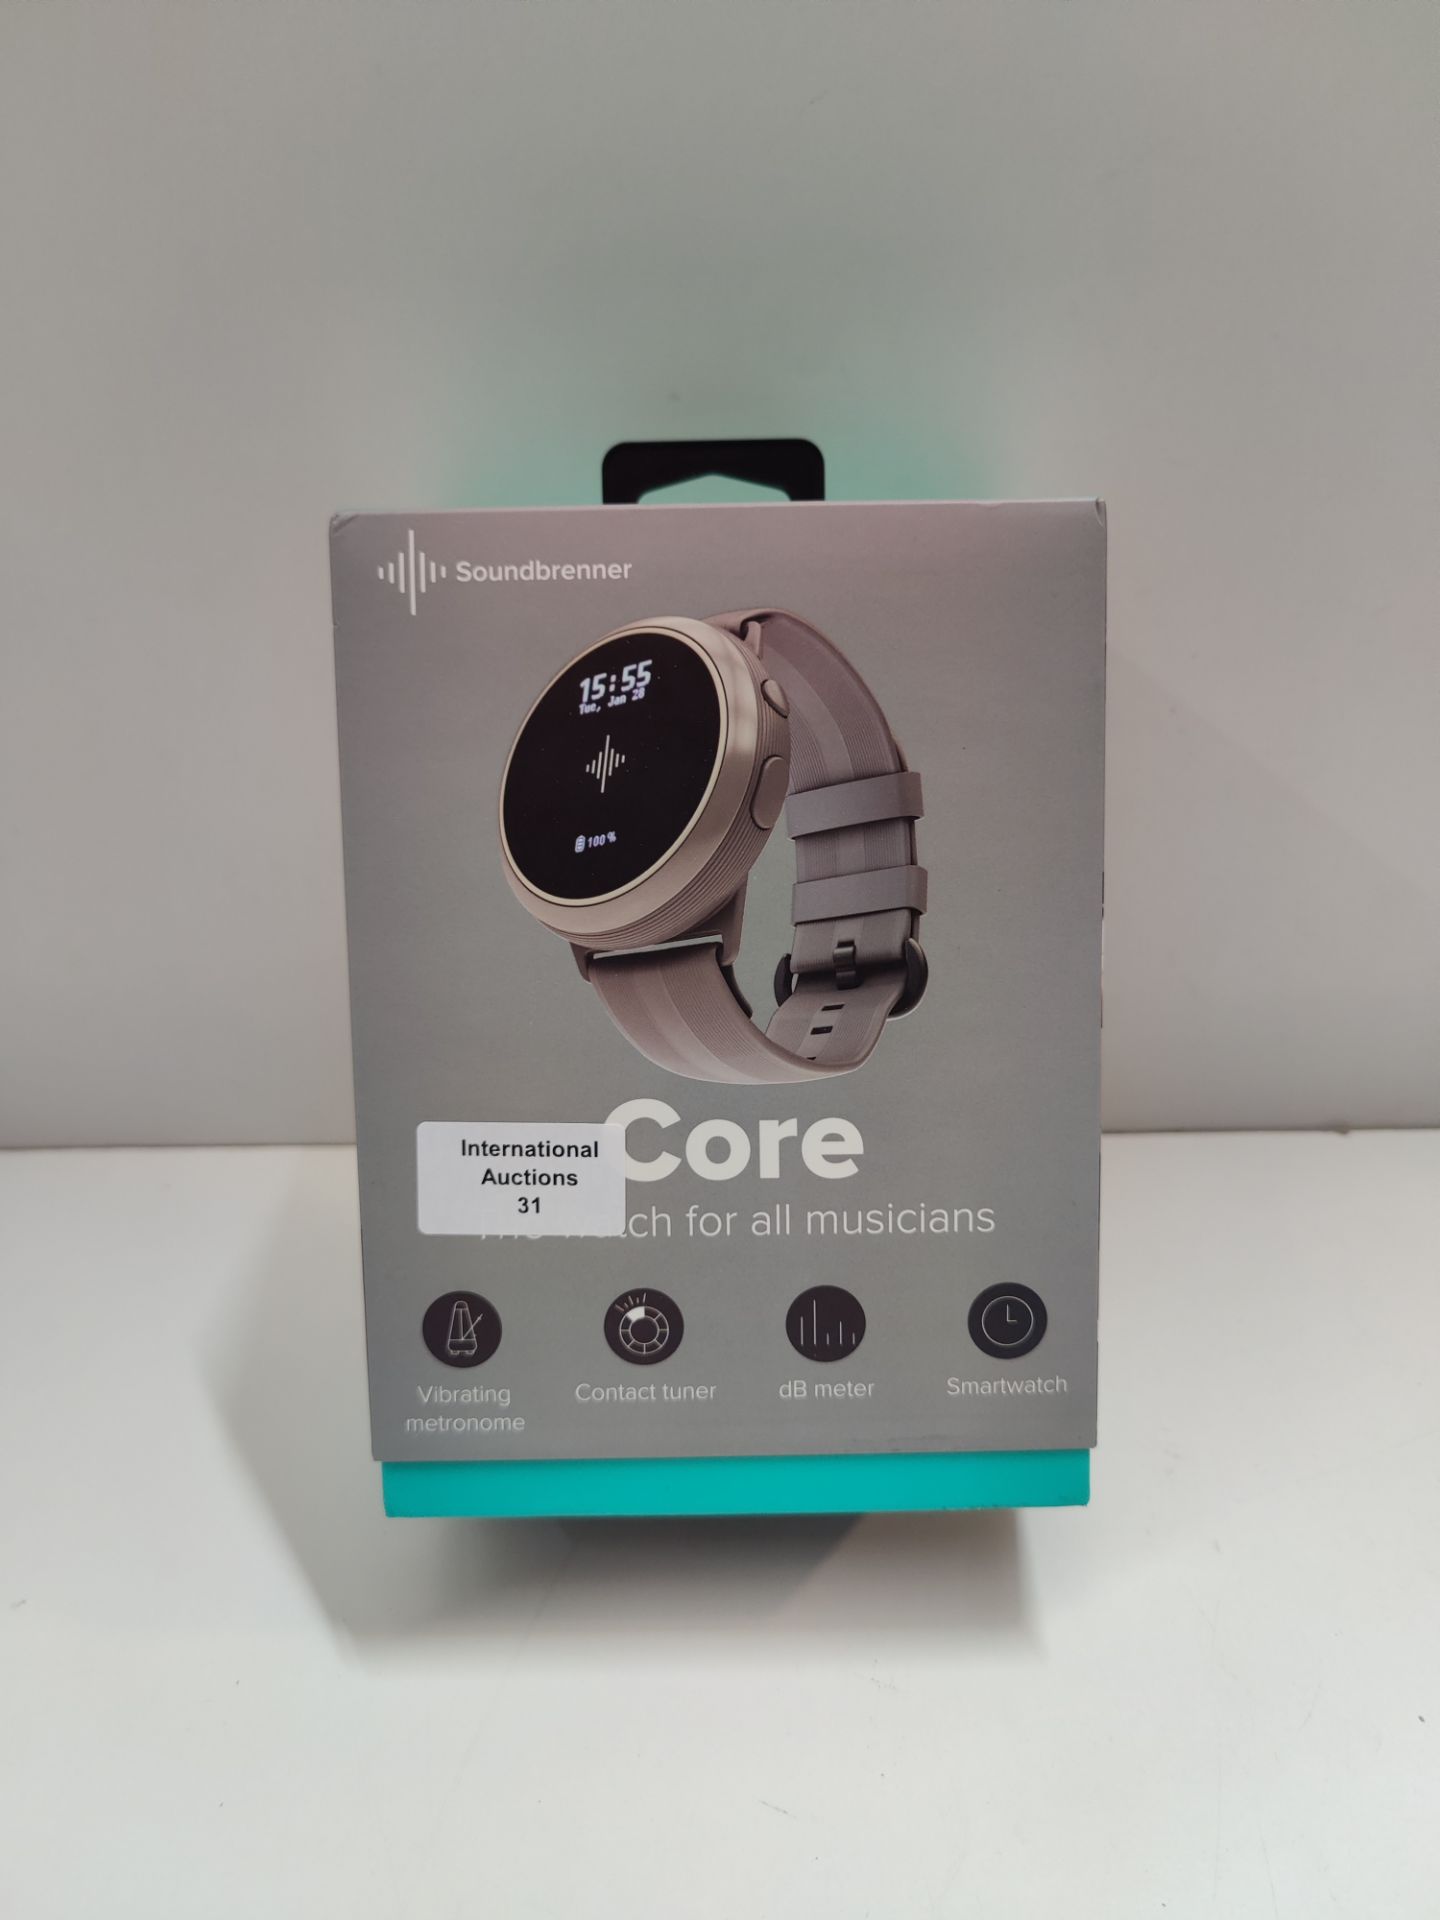 RRP £179.00 Soundbrenner Core | 4-in-1 music tool for musicians | Vibrating metronome - Image 2 of 2